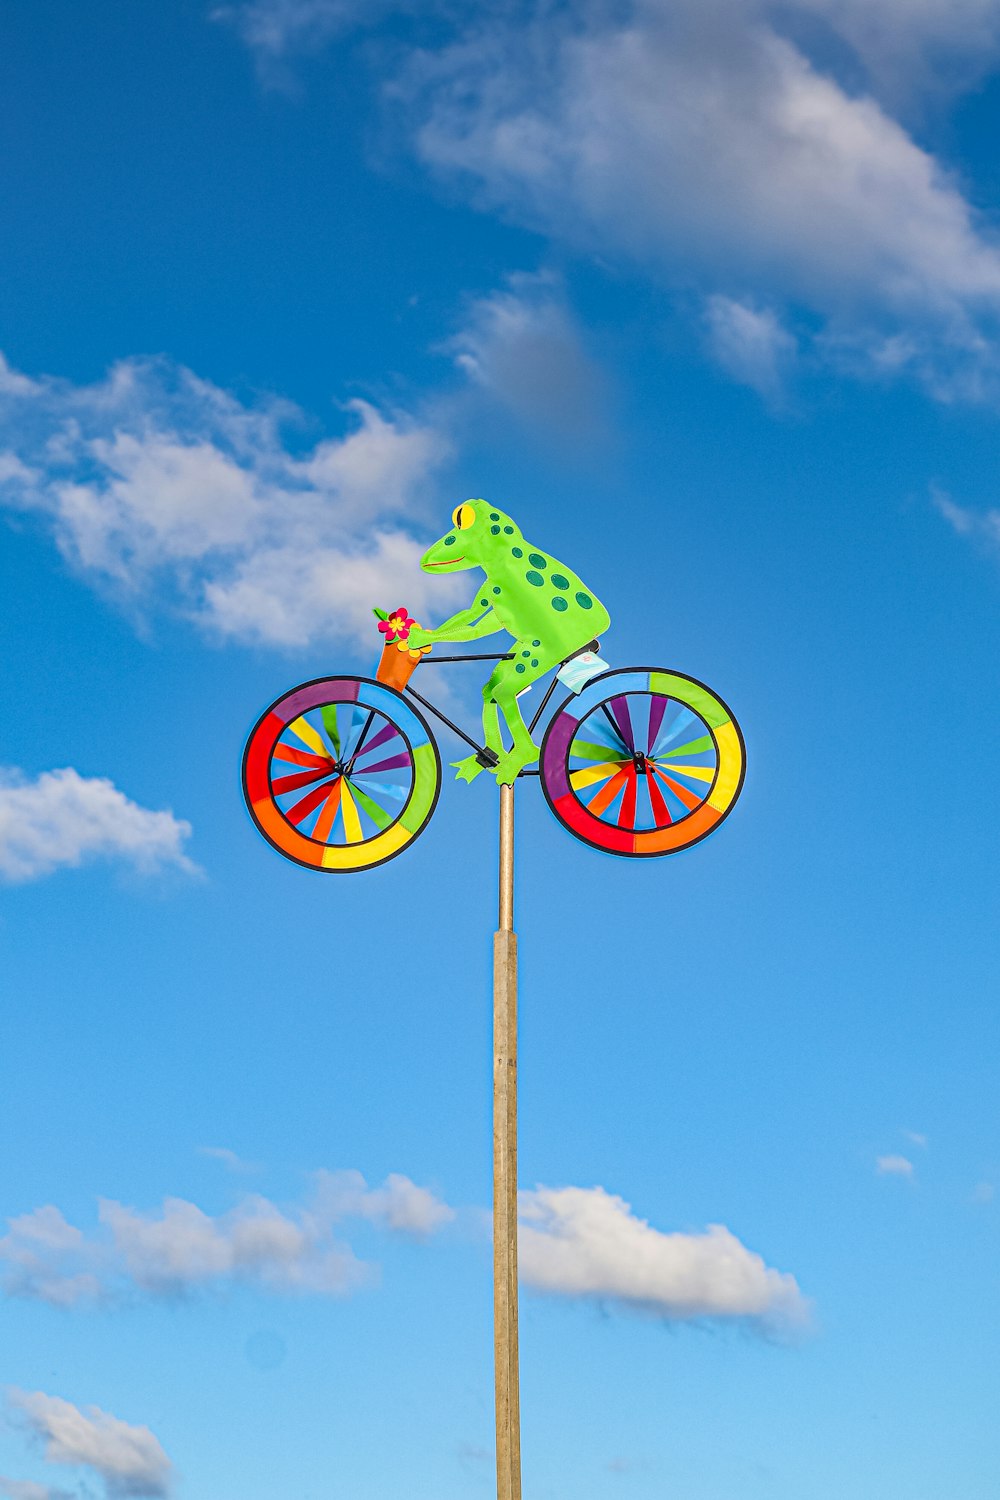 a green frog riding a colorful bicycle on a pole